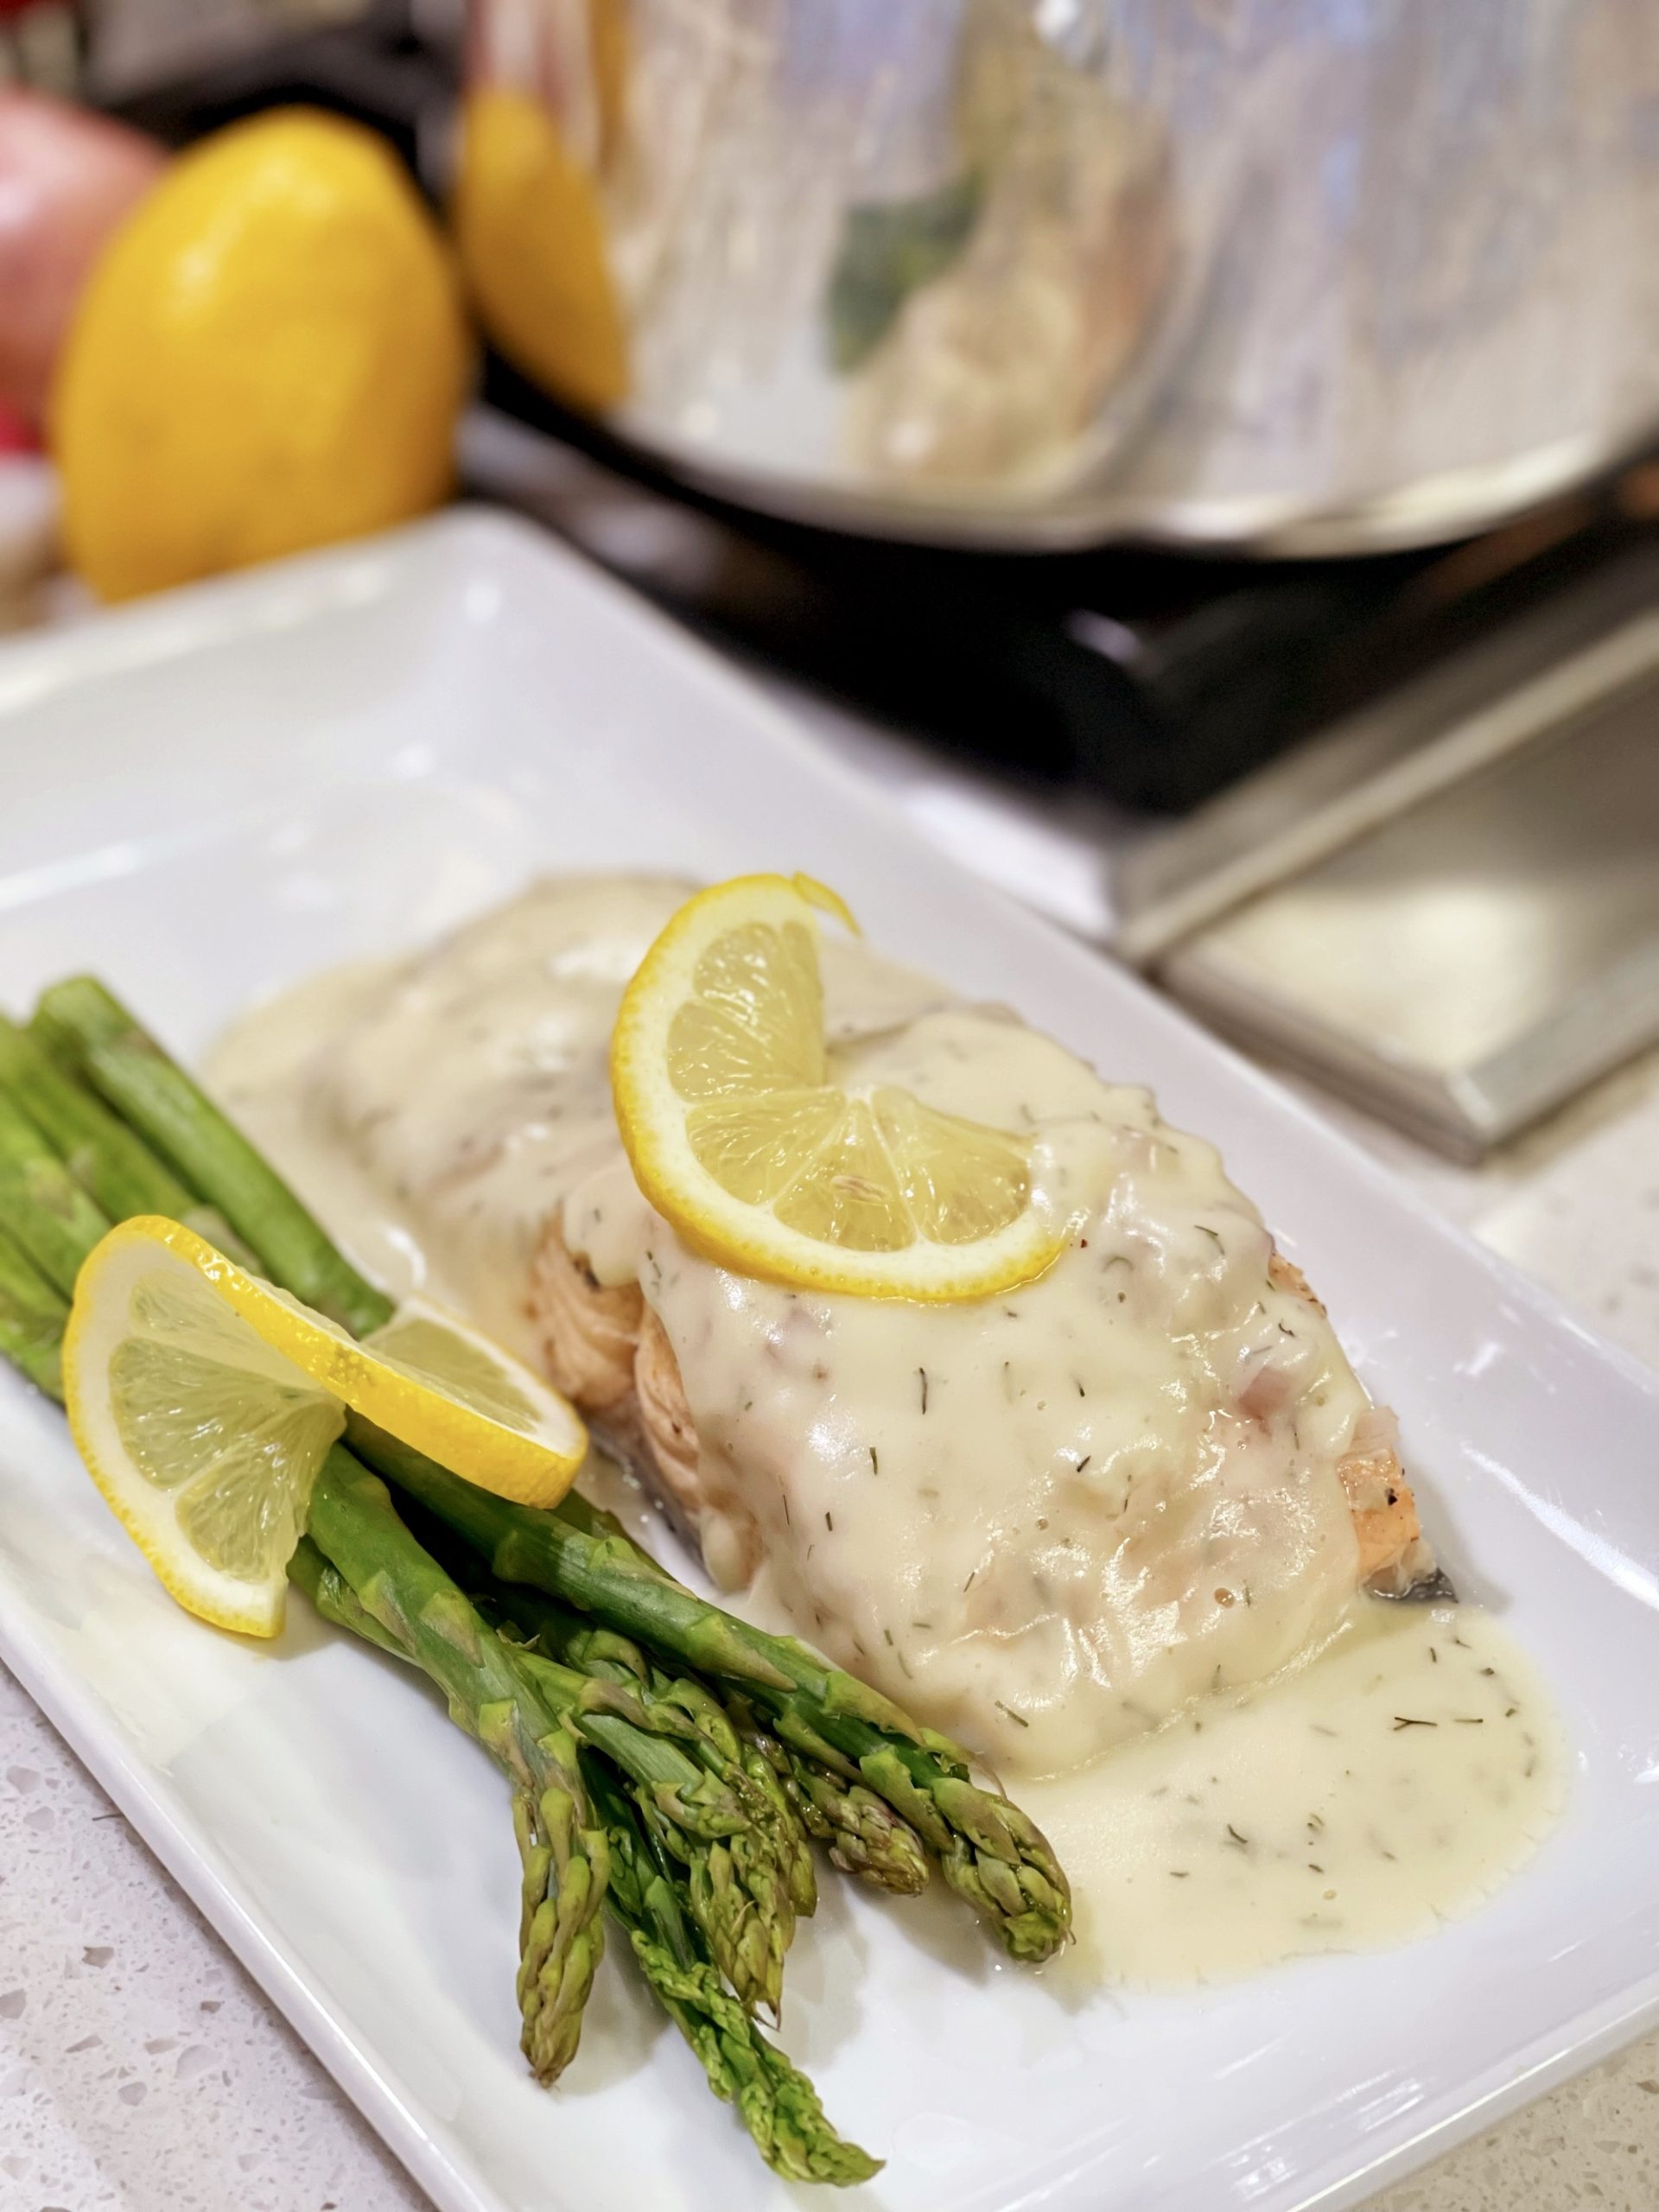 Shallow Poached Salmon with a - Lemon Veloute cooking Dill with Sauce bryan chef